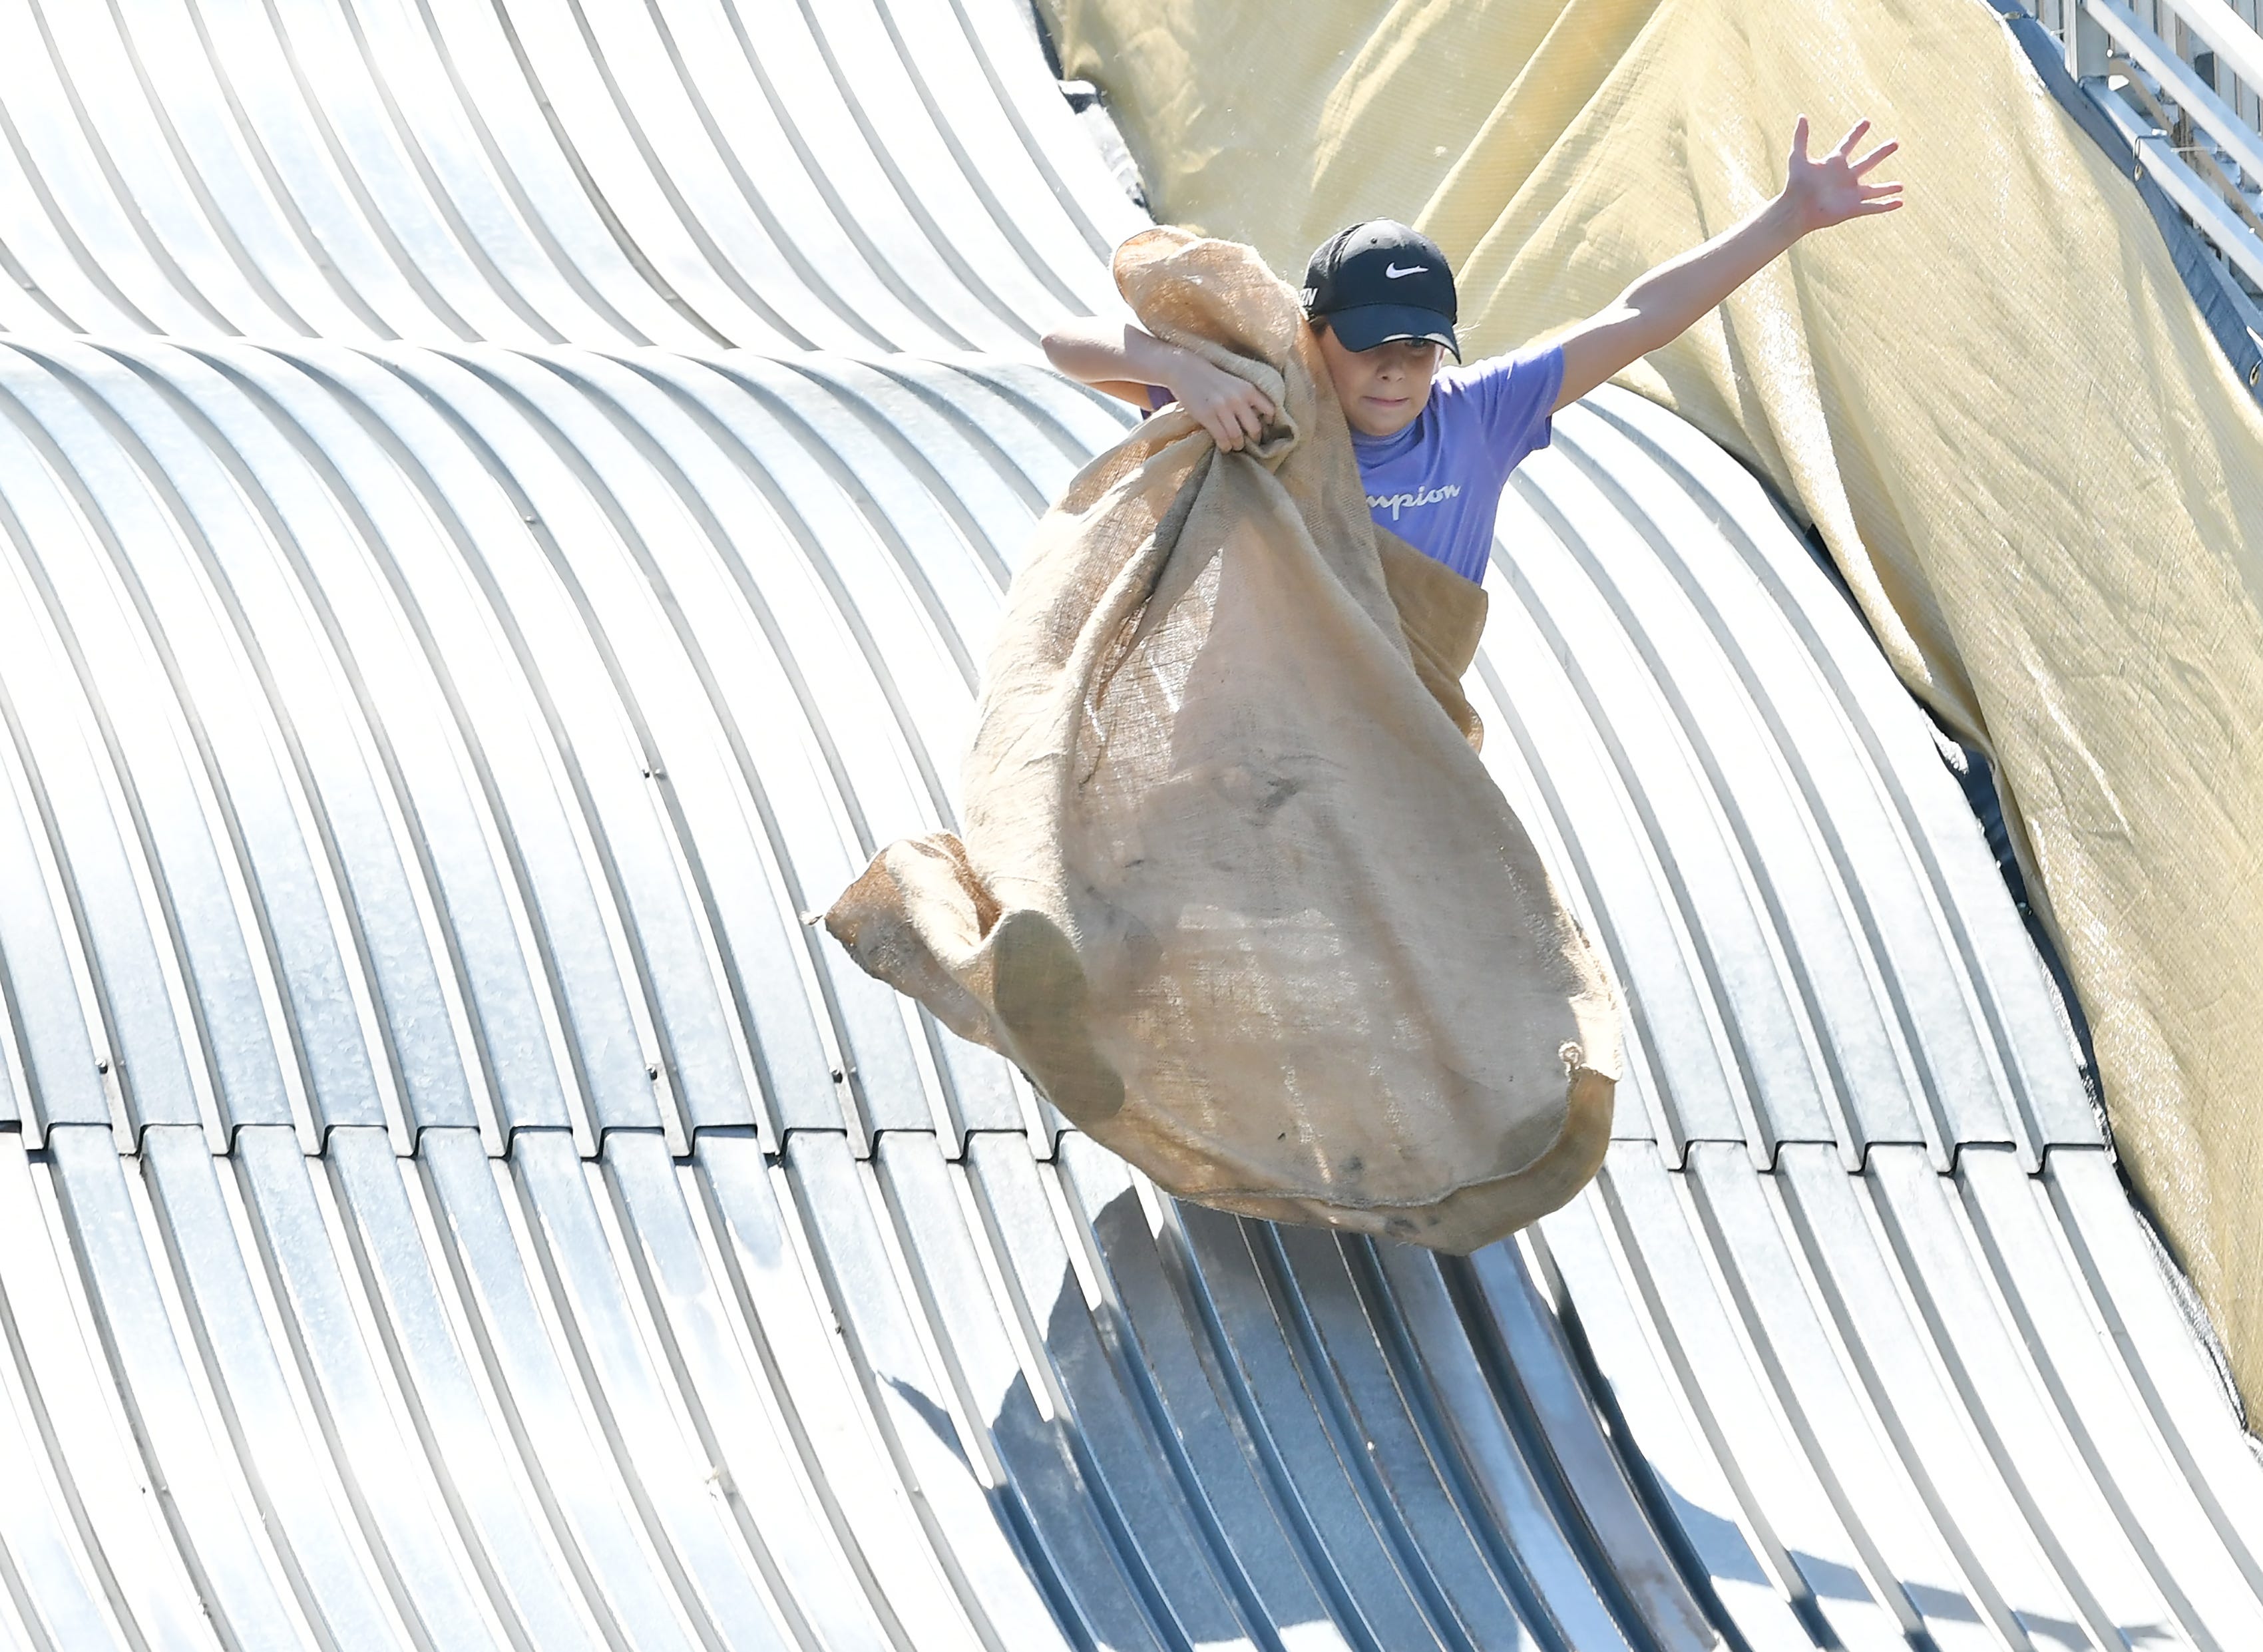 Bianca Whitney, 10, of Royal Oak is airborne going down the giant slide on Belle Isle in Detroit on Aug. 19, 2022.